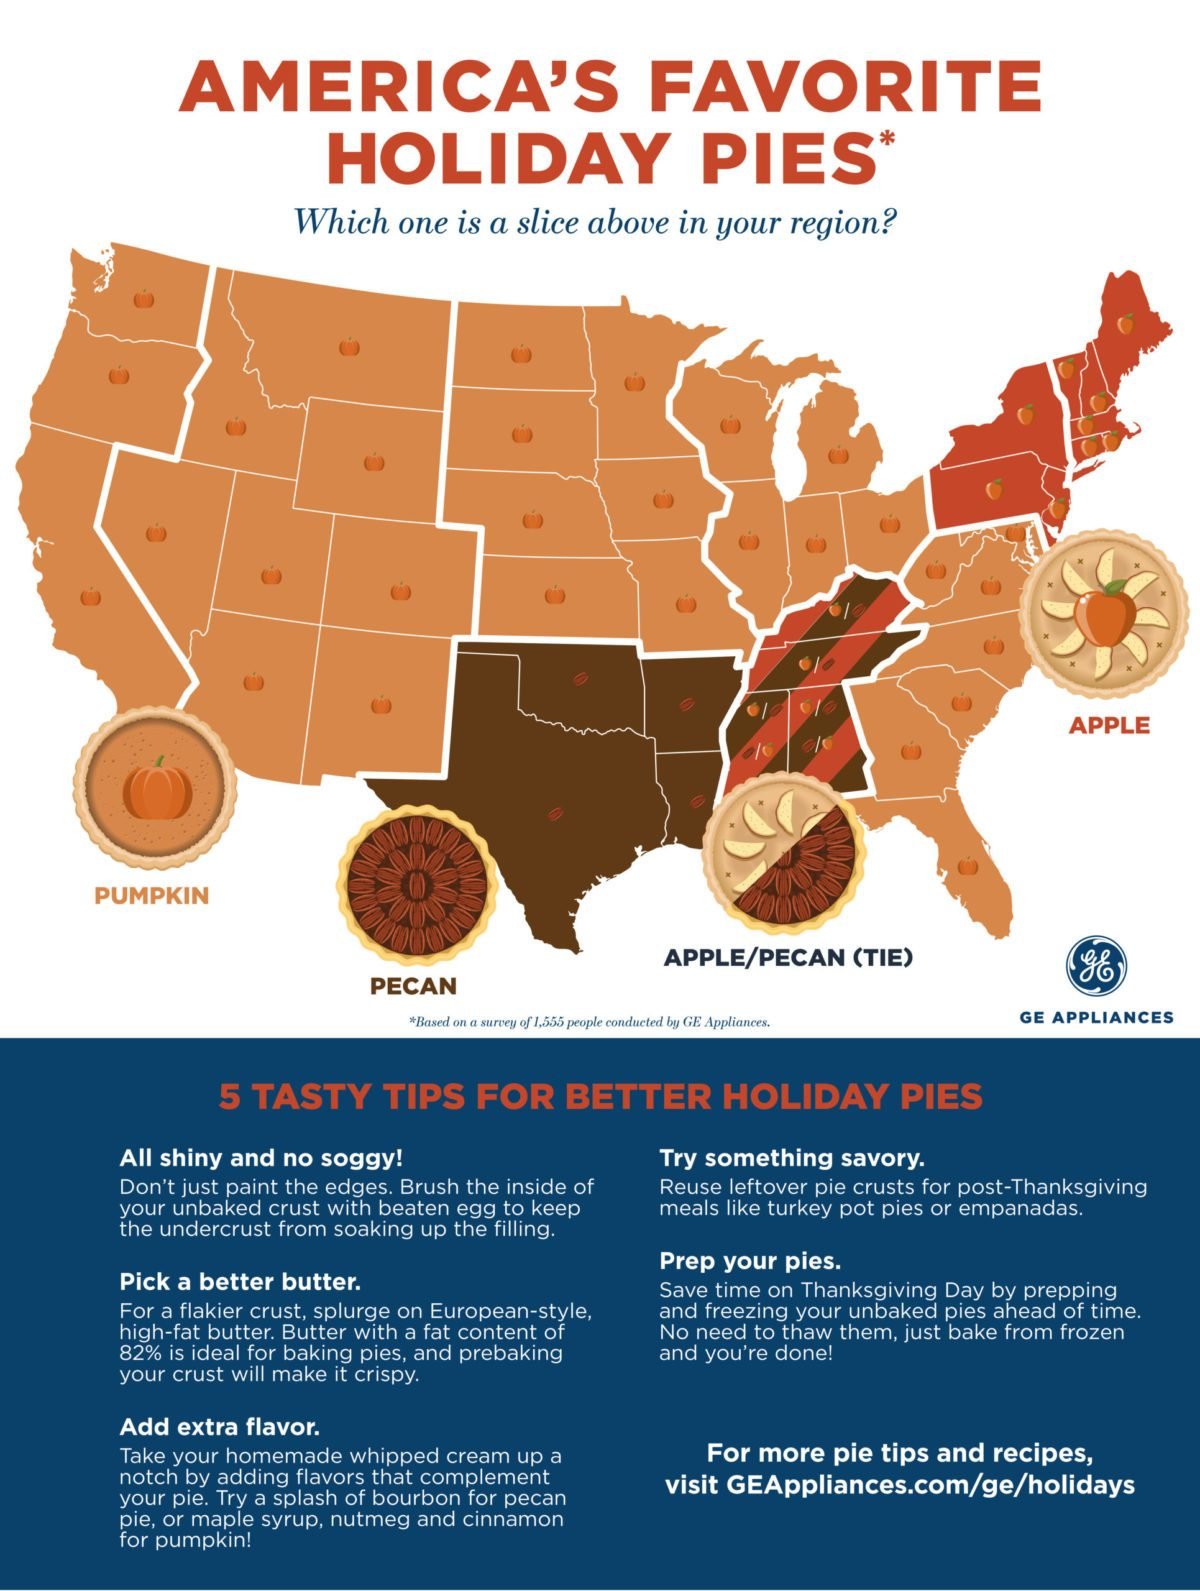 AMERICA'S FAVORITE HOLIDAY PIES